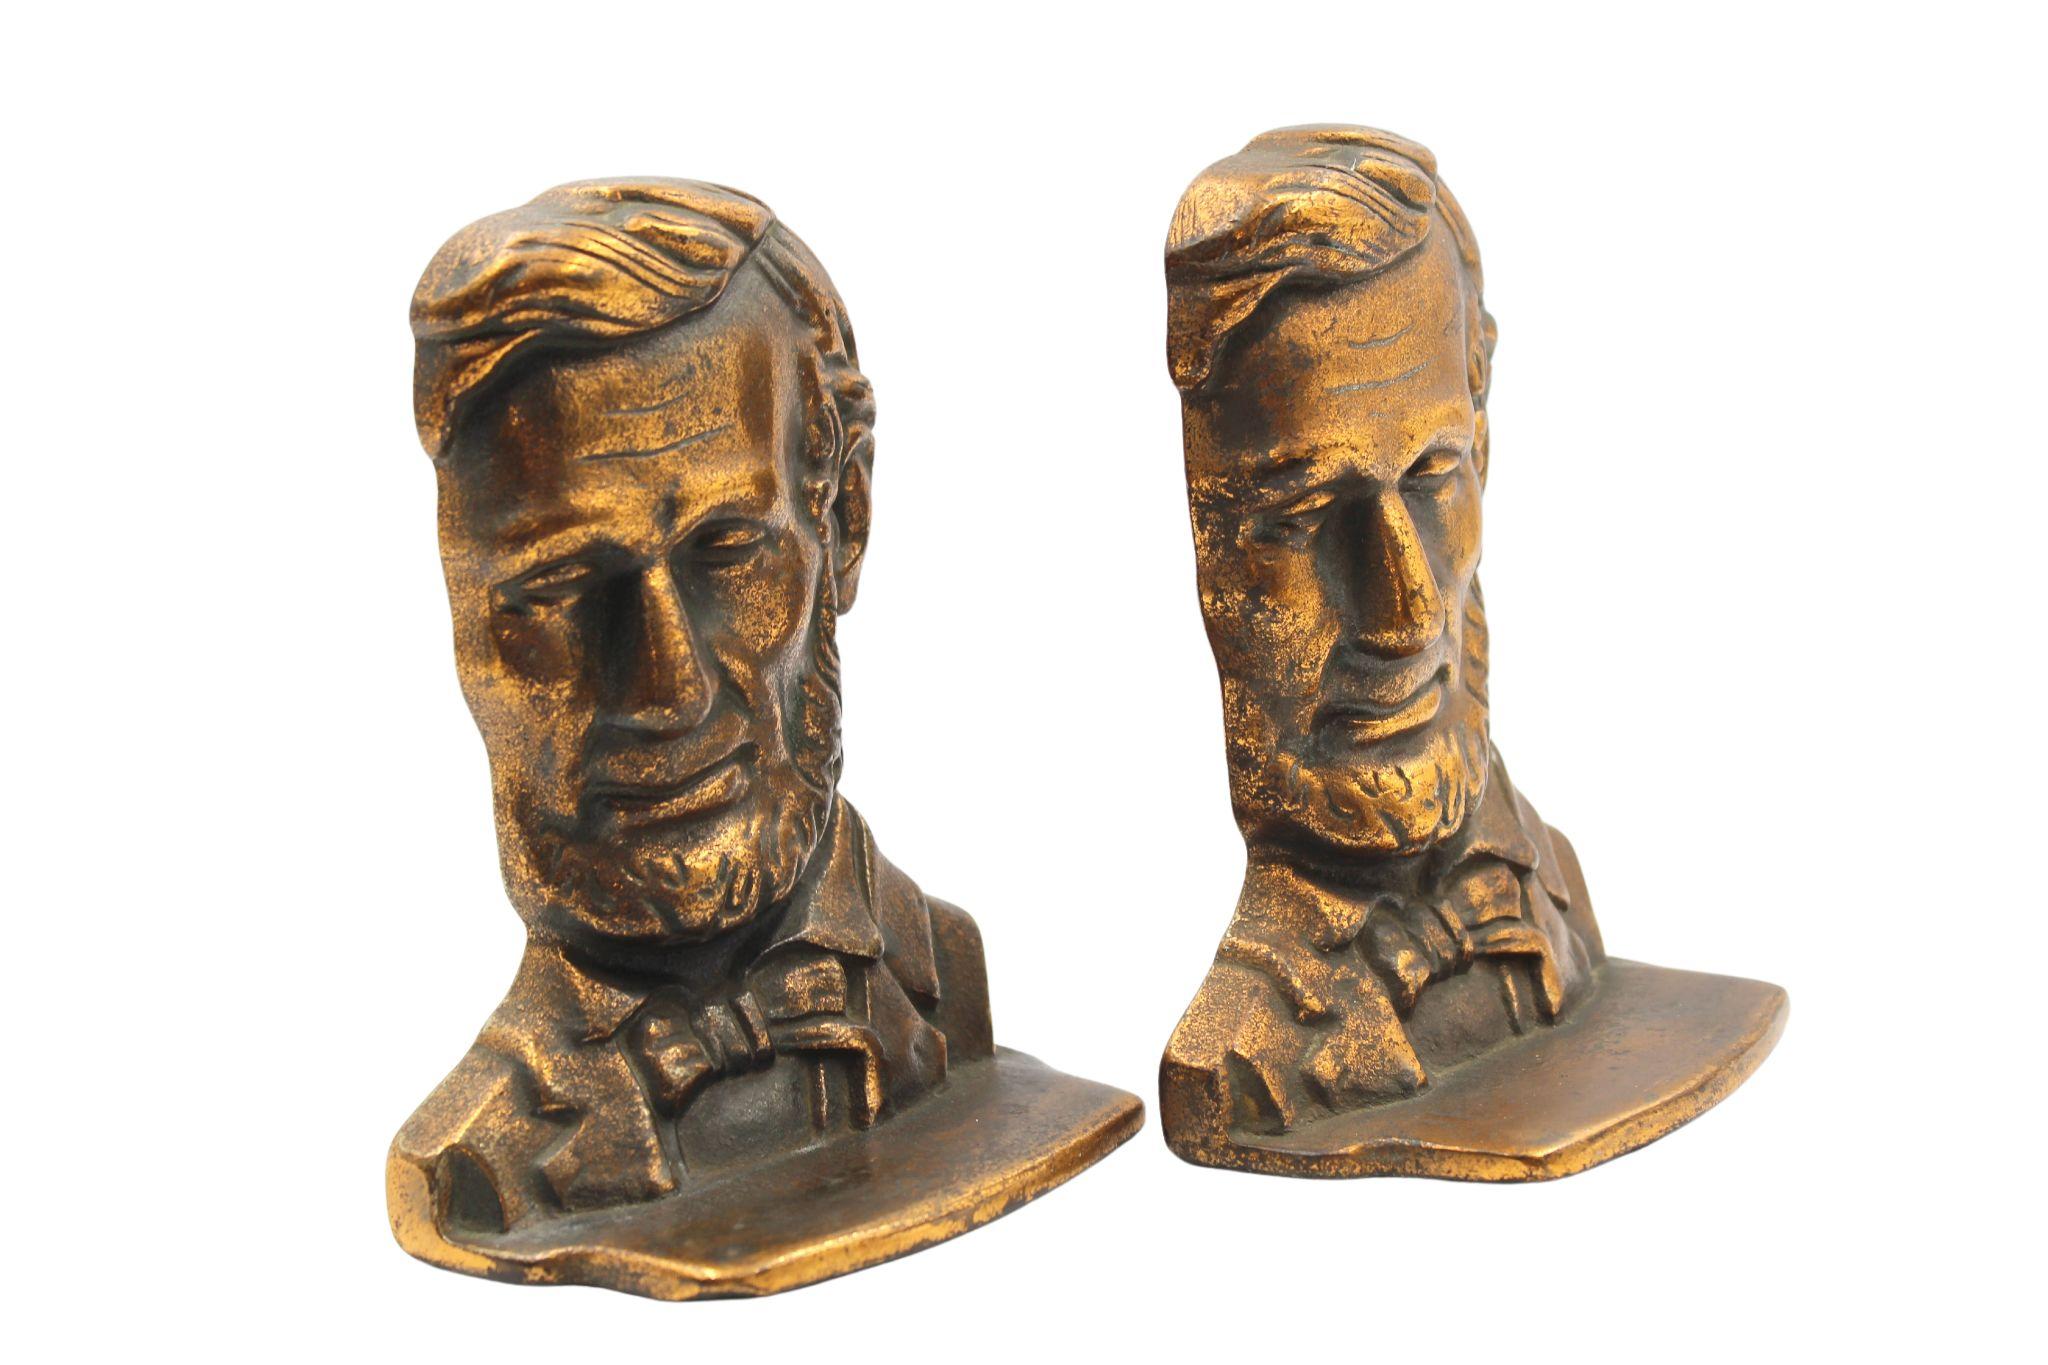 Vintage Abraham Lincoln Bust Bookends In Good Condition For Sale In Colorado Springs, CO